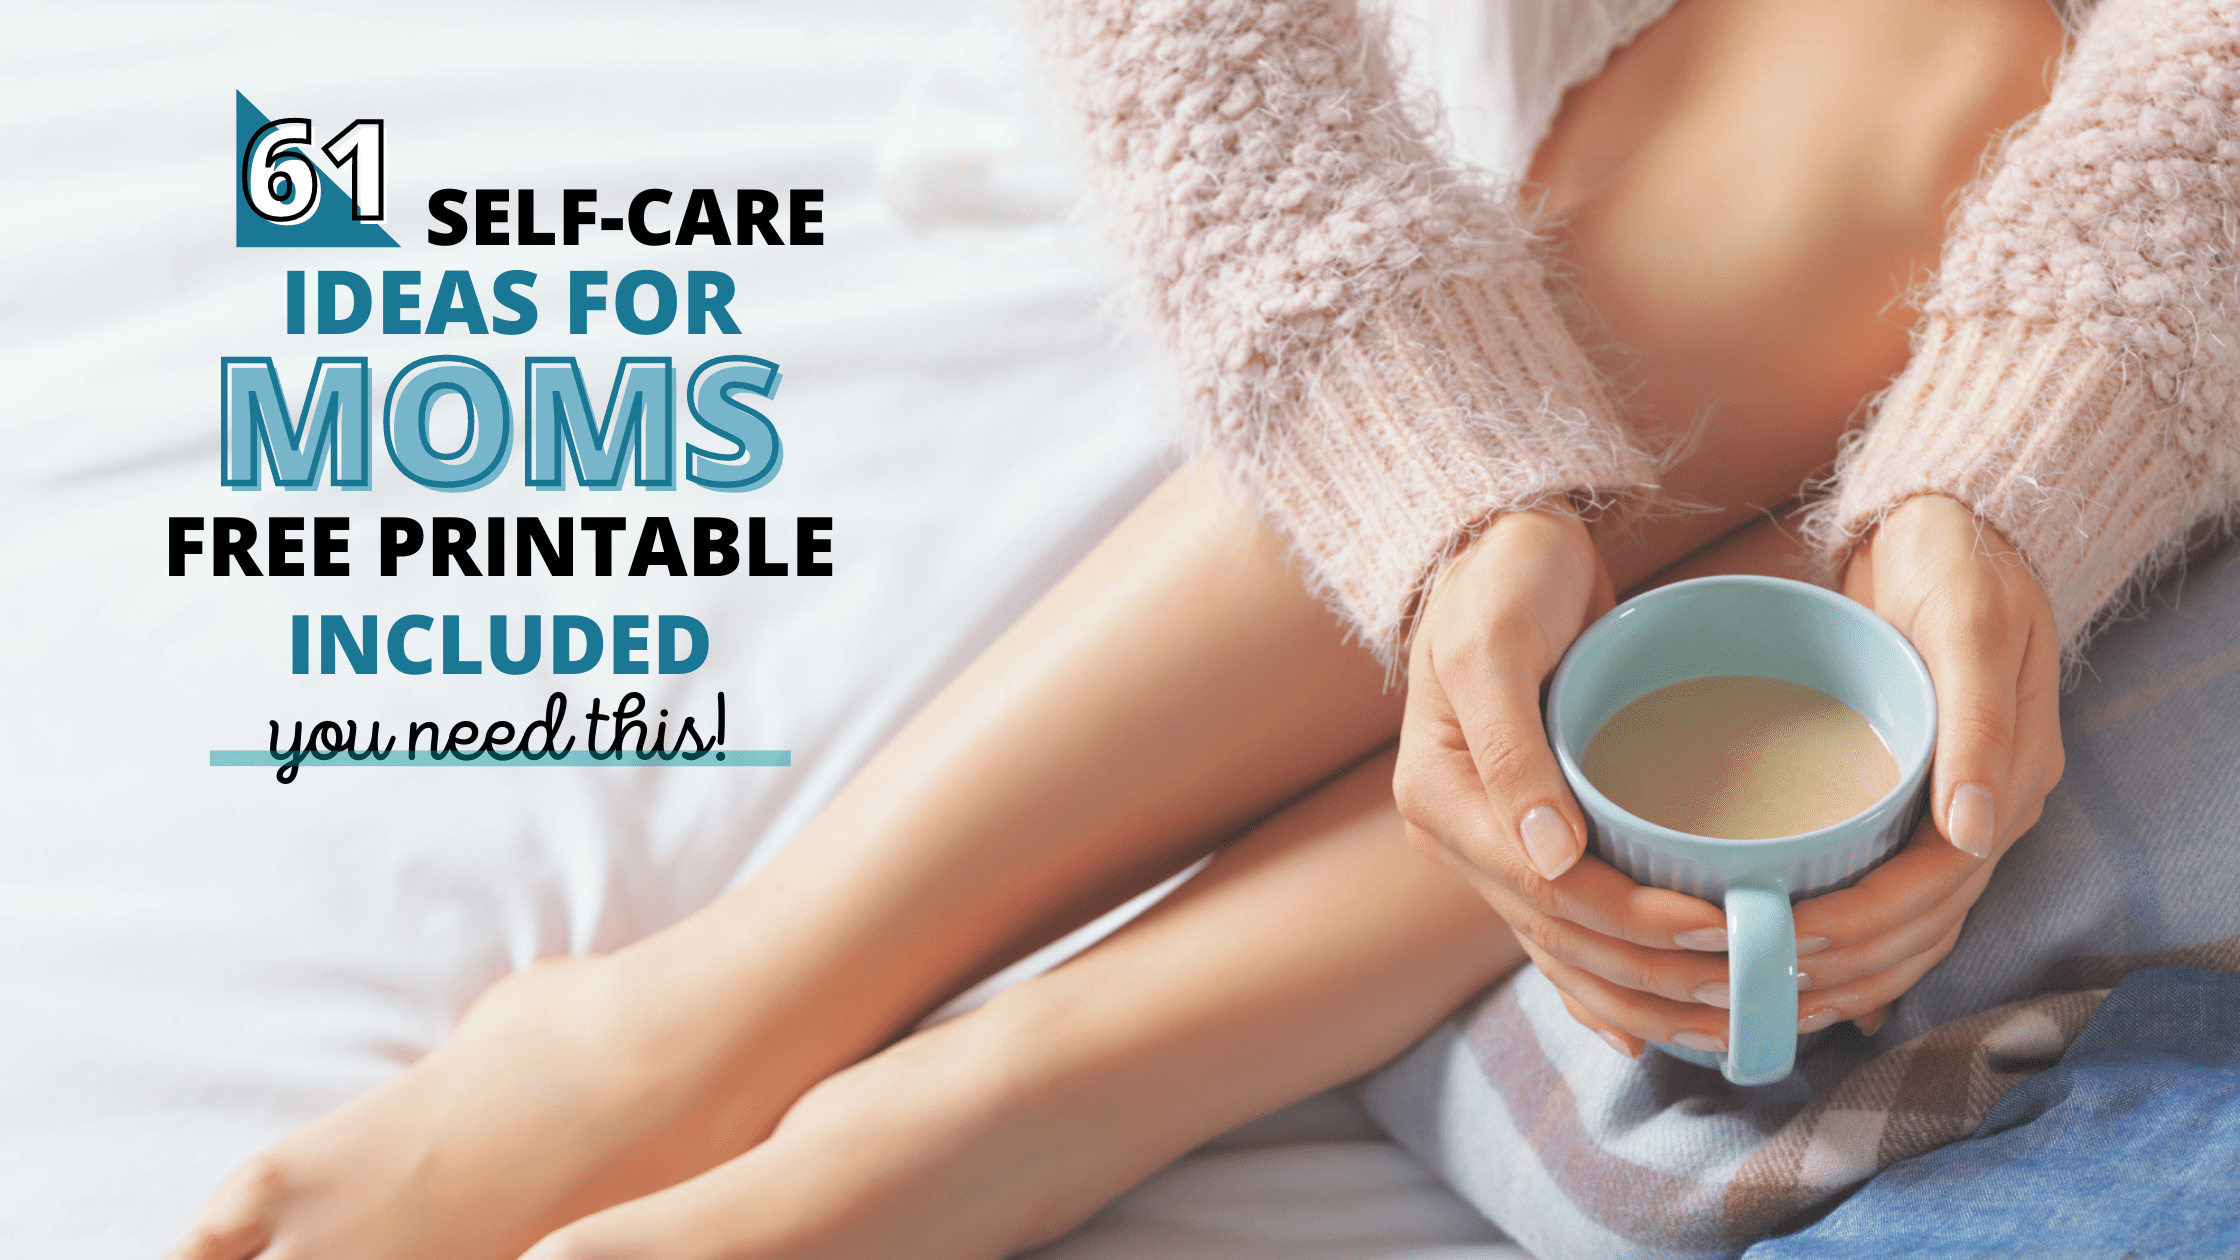 61 self-care ideas for moms - free printable included - you need this